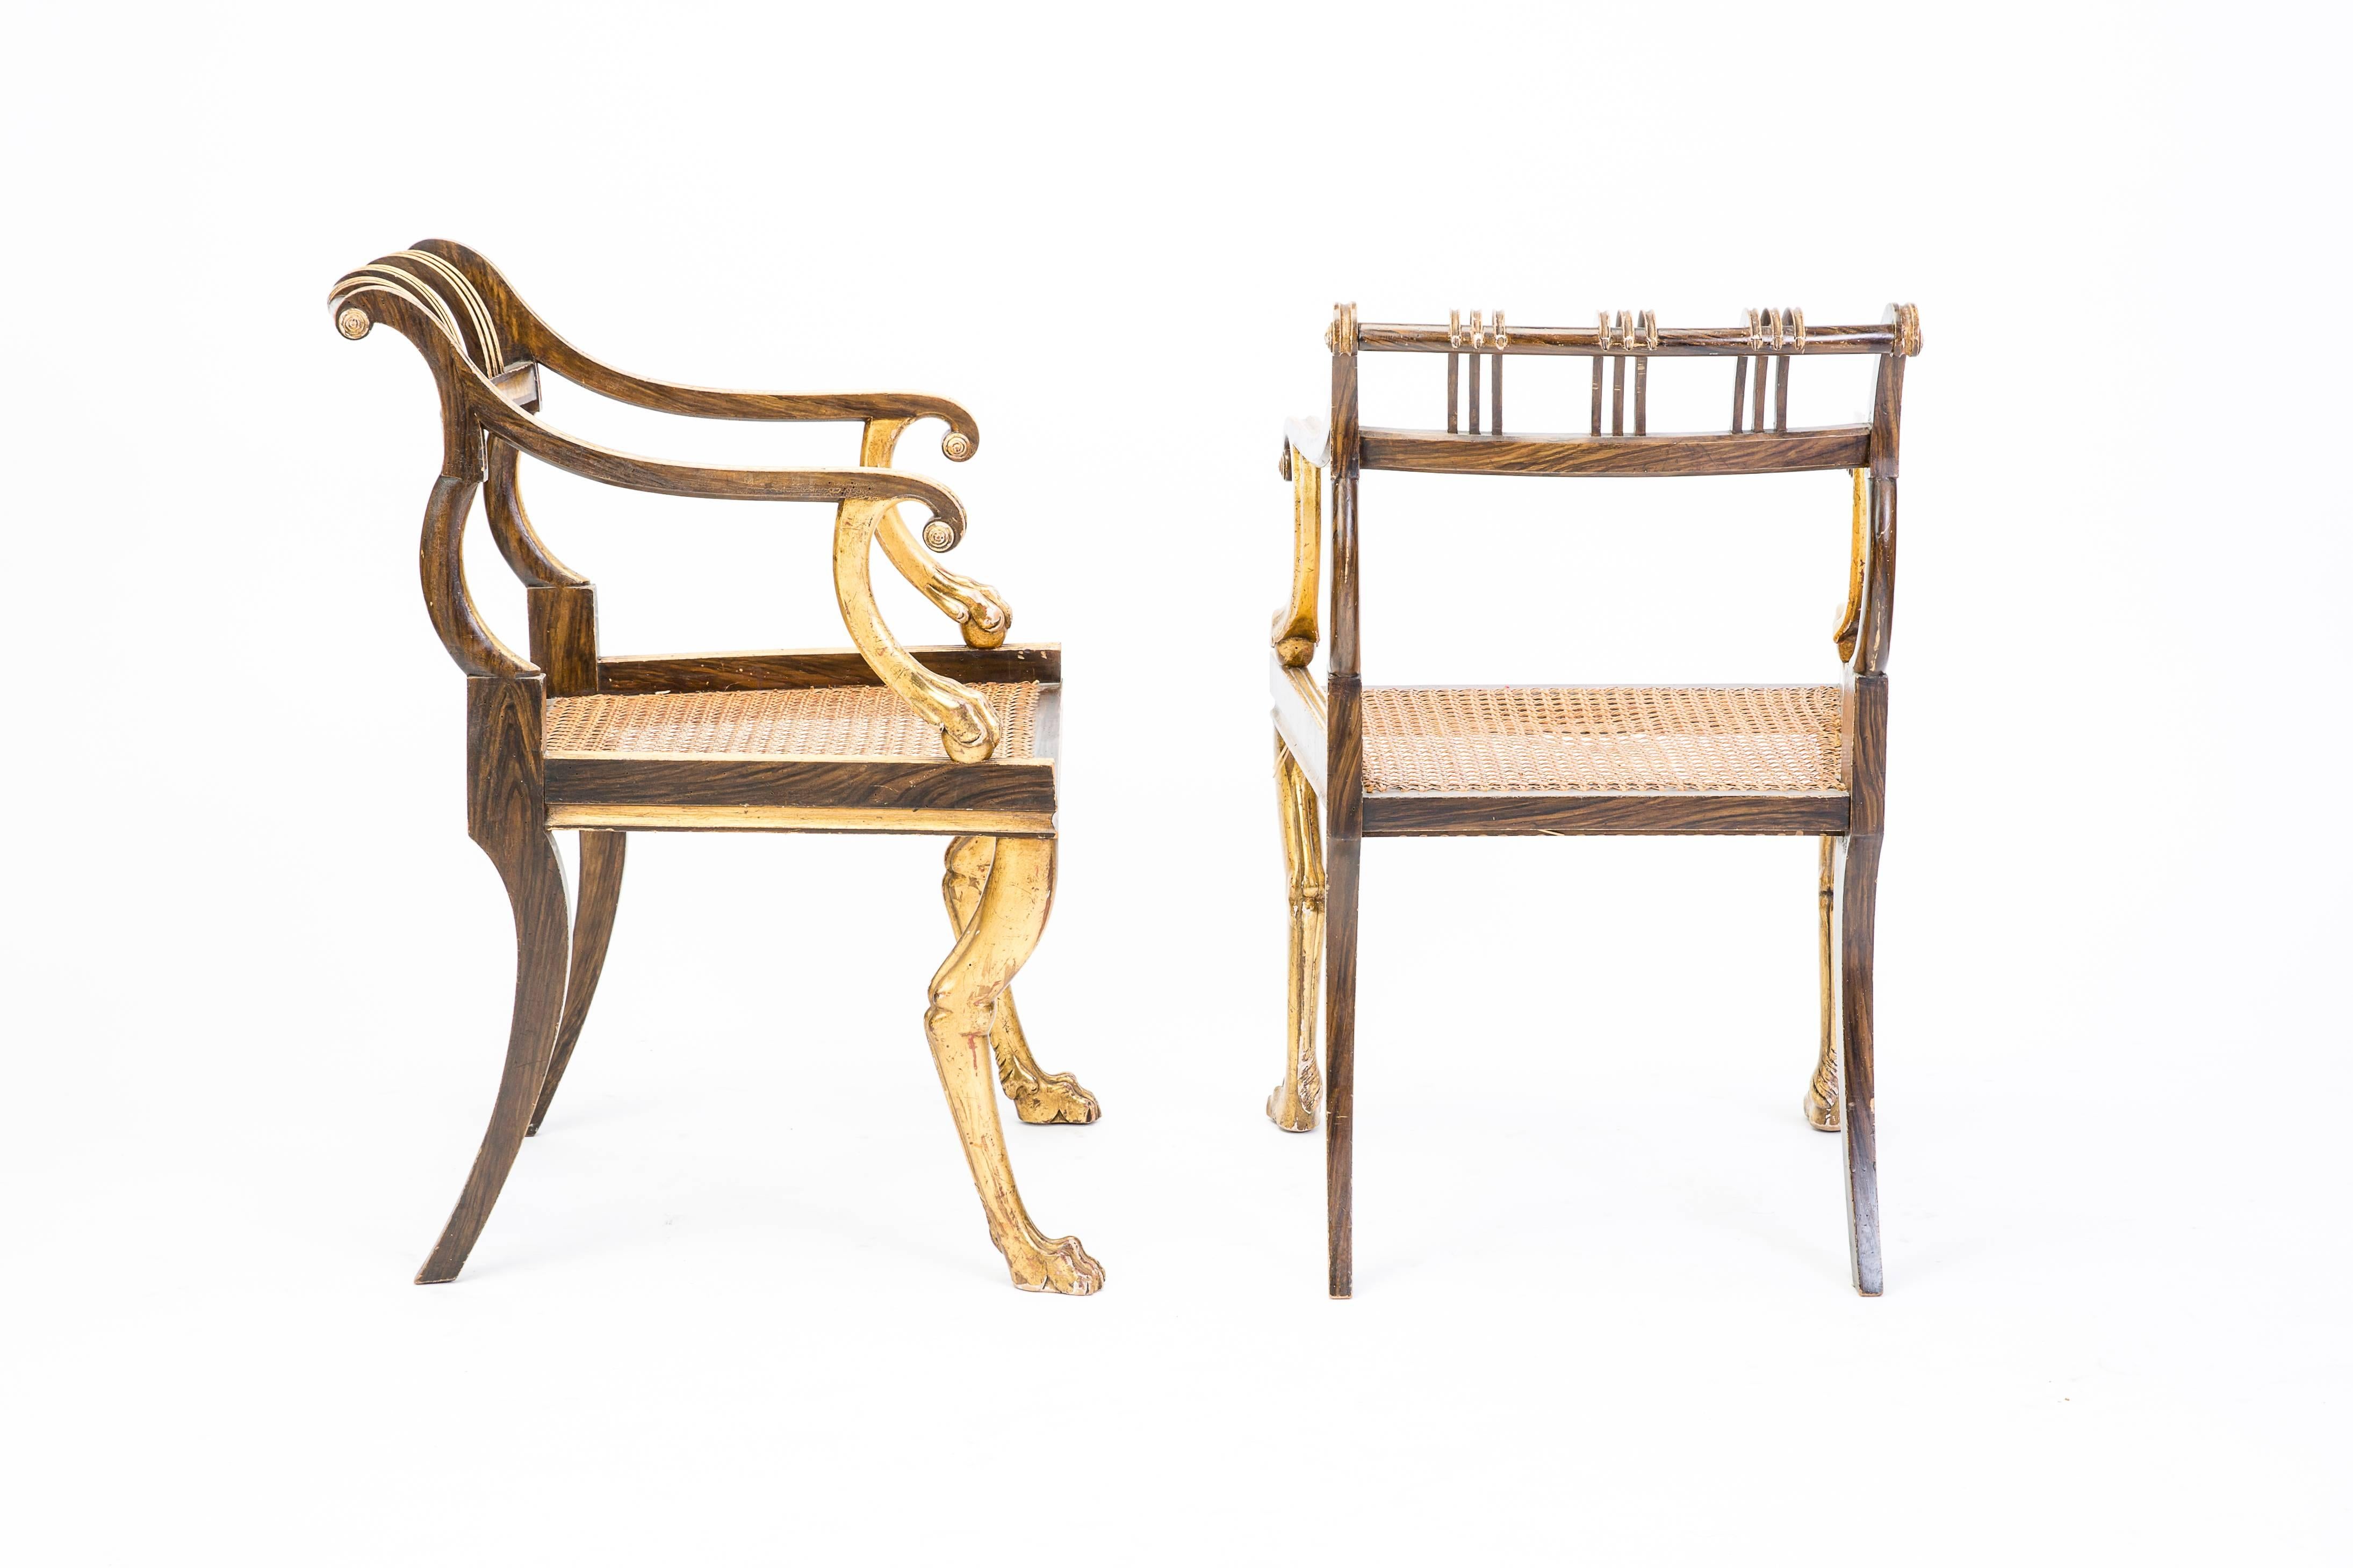 Pair of early 19th century Regency style chairs with rosewood and parcel-gilt elbows. Carved bar top rail with moulded vertical back with scroll arms and lion paw's supports. Cane seat on naturalistic legs terminating in paw feet.

Measures: 33